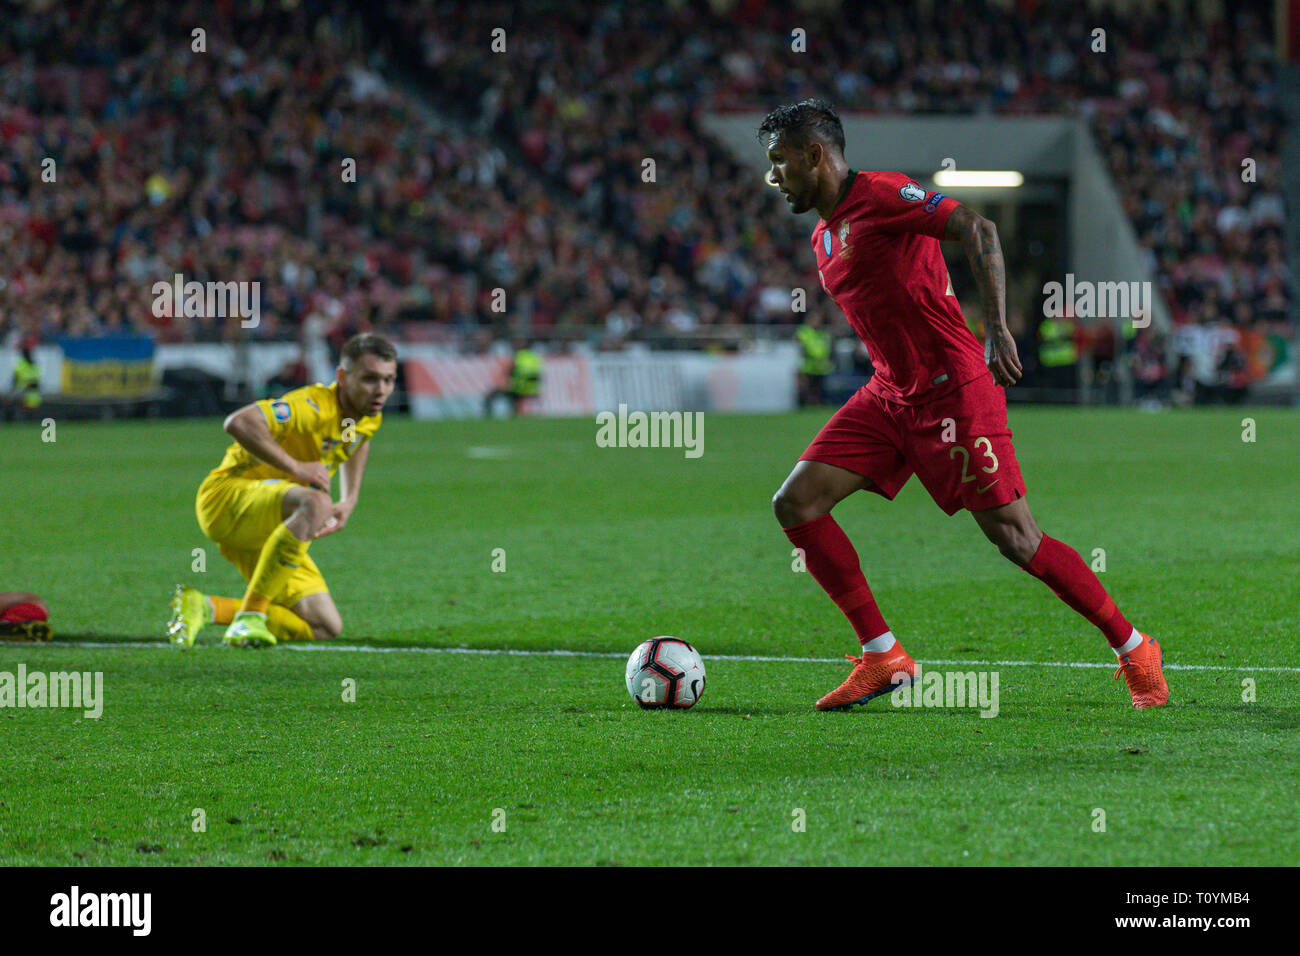 Lisbon, Portugal. 22nd Mar, 2019. March 22, 2019. Lisbon, Portugal. Portugal's and Braga forward Dyego Sousa (23) during the European Championship 2020 Qualifying Round between Portugal and Ukraine Credit: Alexandre de Sousa/Alamy Live News Stock Photo